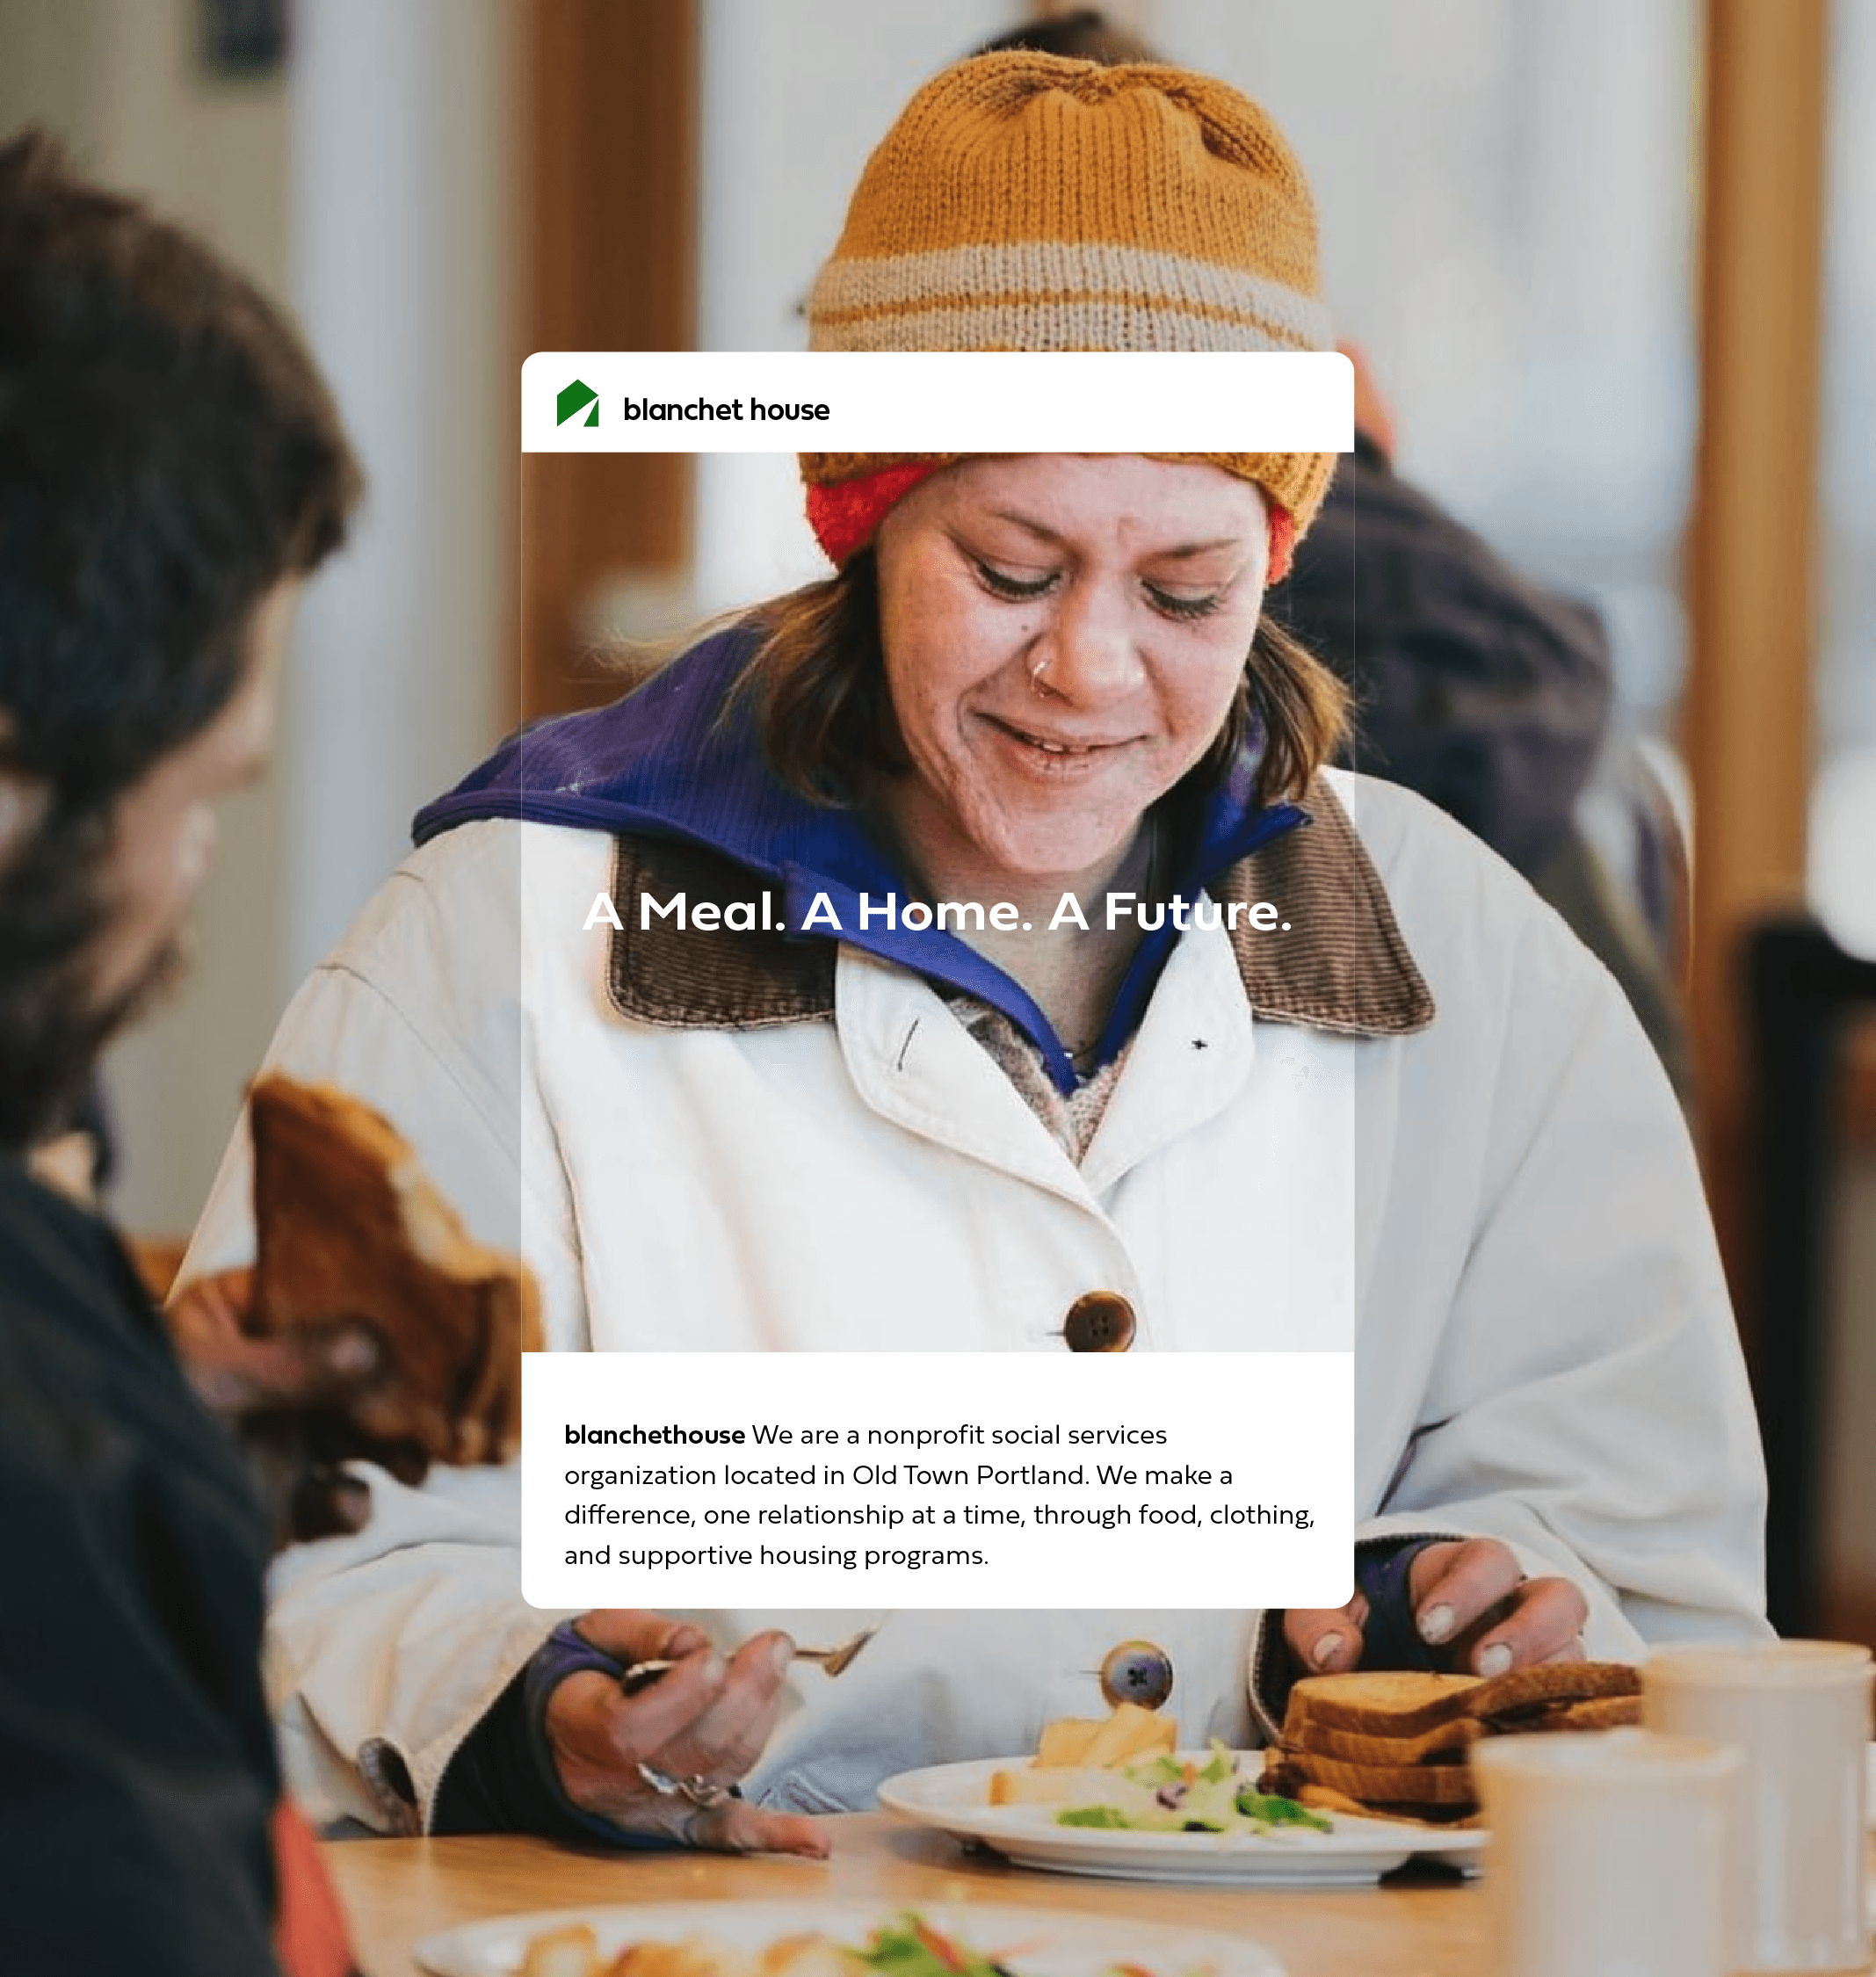 blanchet house social media post showing woman eating. Heading reads A Meal. A home. A Future. Caption reads We are a nonprofit social servies organization located in Old Town Portland. We make a difference one relationship at a time through food, clothing and supportive housing programs.